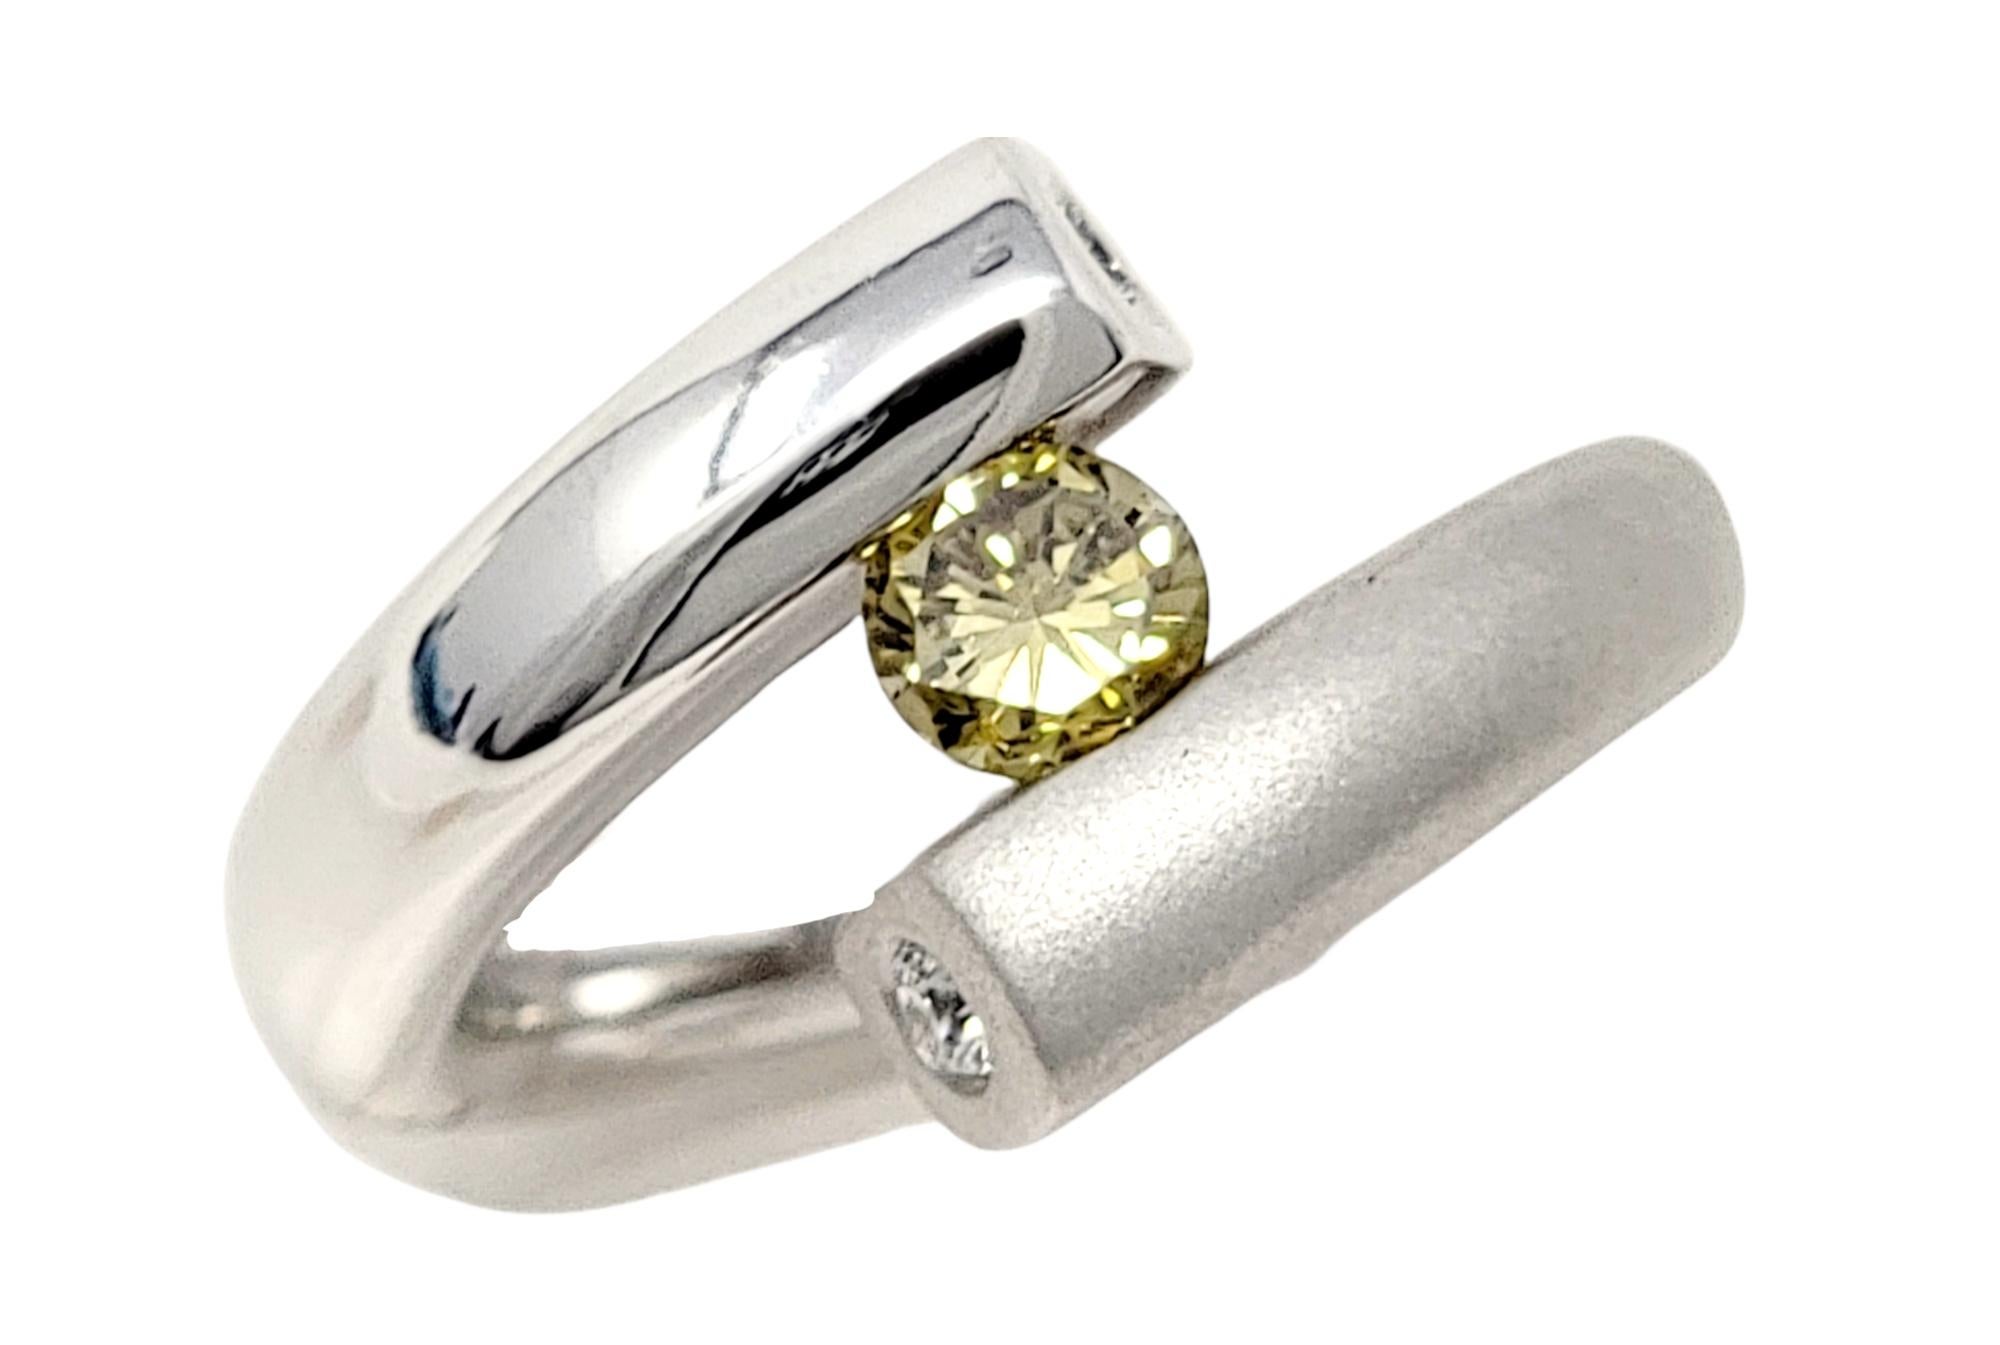 Ring size: 7.25

Stunning, ultra-modern diamond band ring by jewelry designer, Gelin Abaci. This contemporary beauty features a single round brilliant diamond, fancy brownish-yellow in color. This hue of this gorgeous stone is known as a 